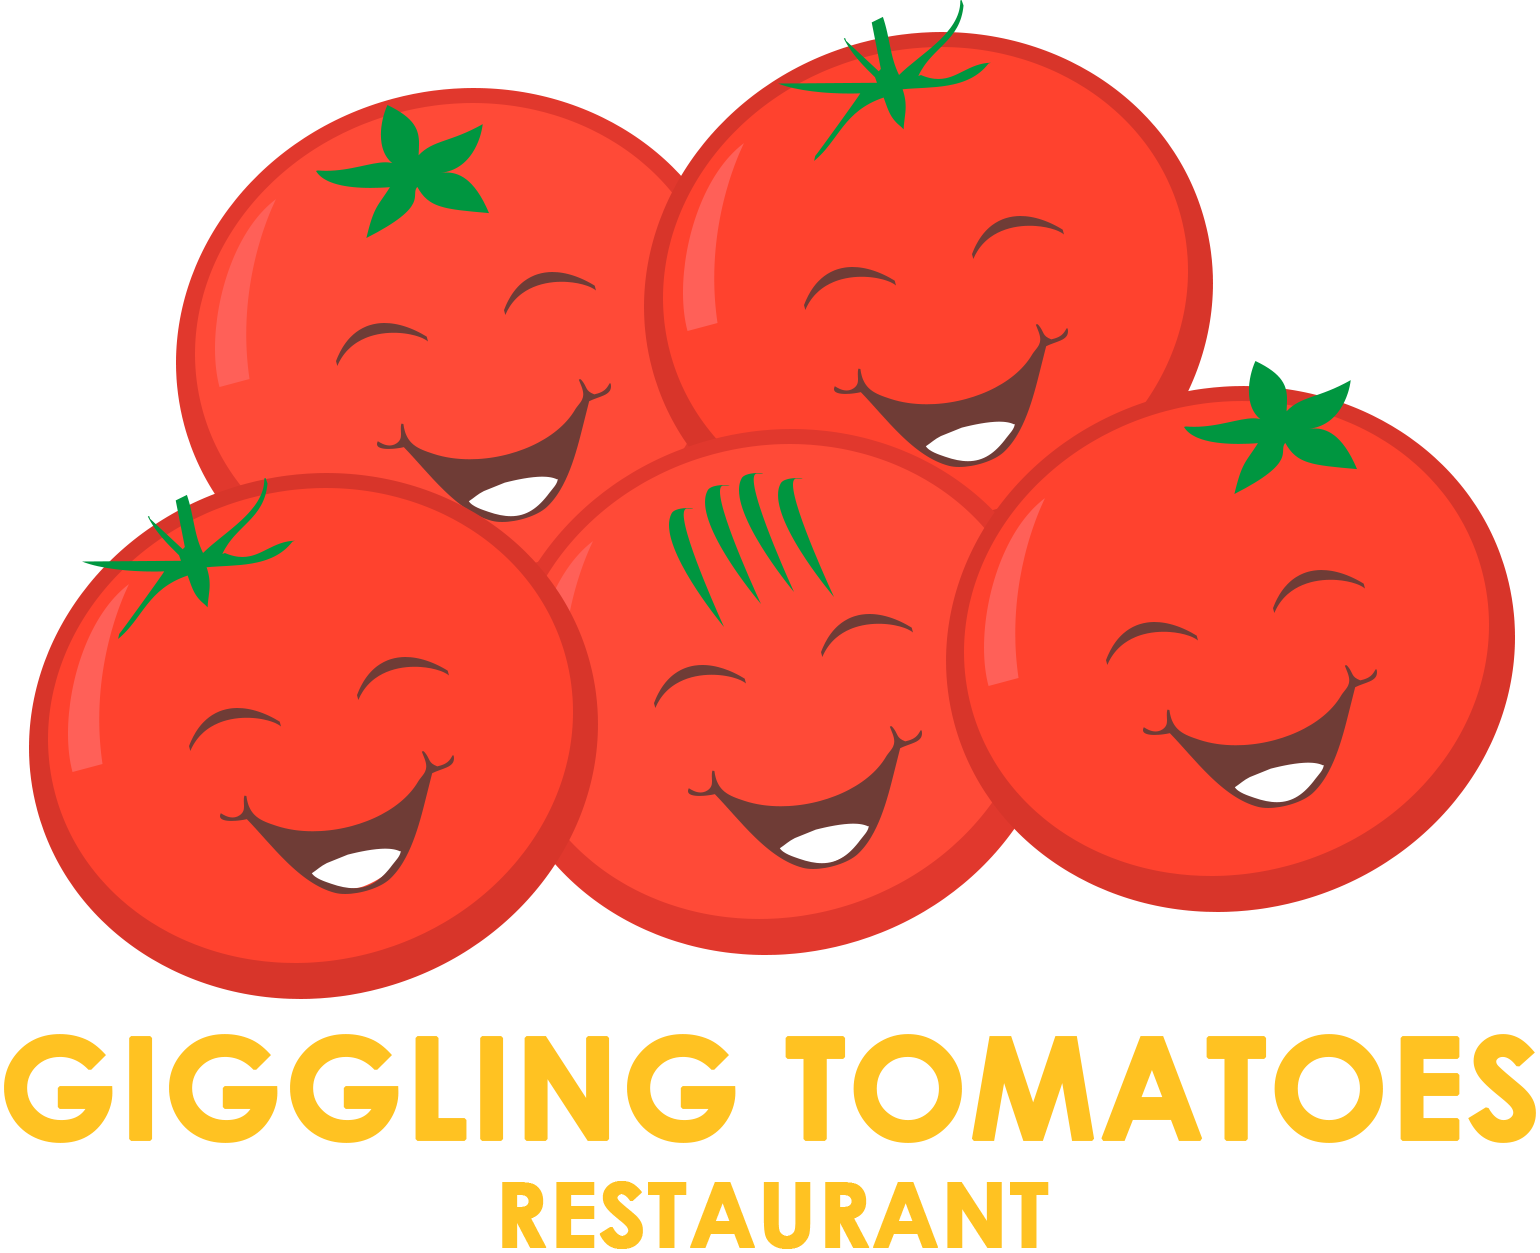 Giggling Tomatoes